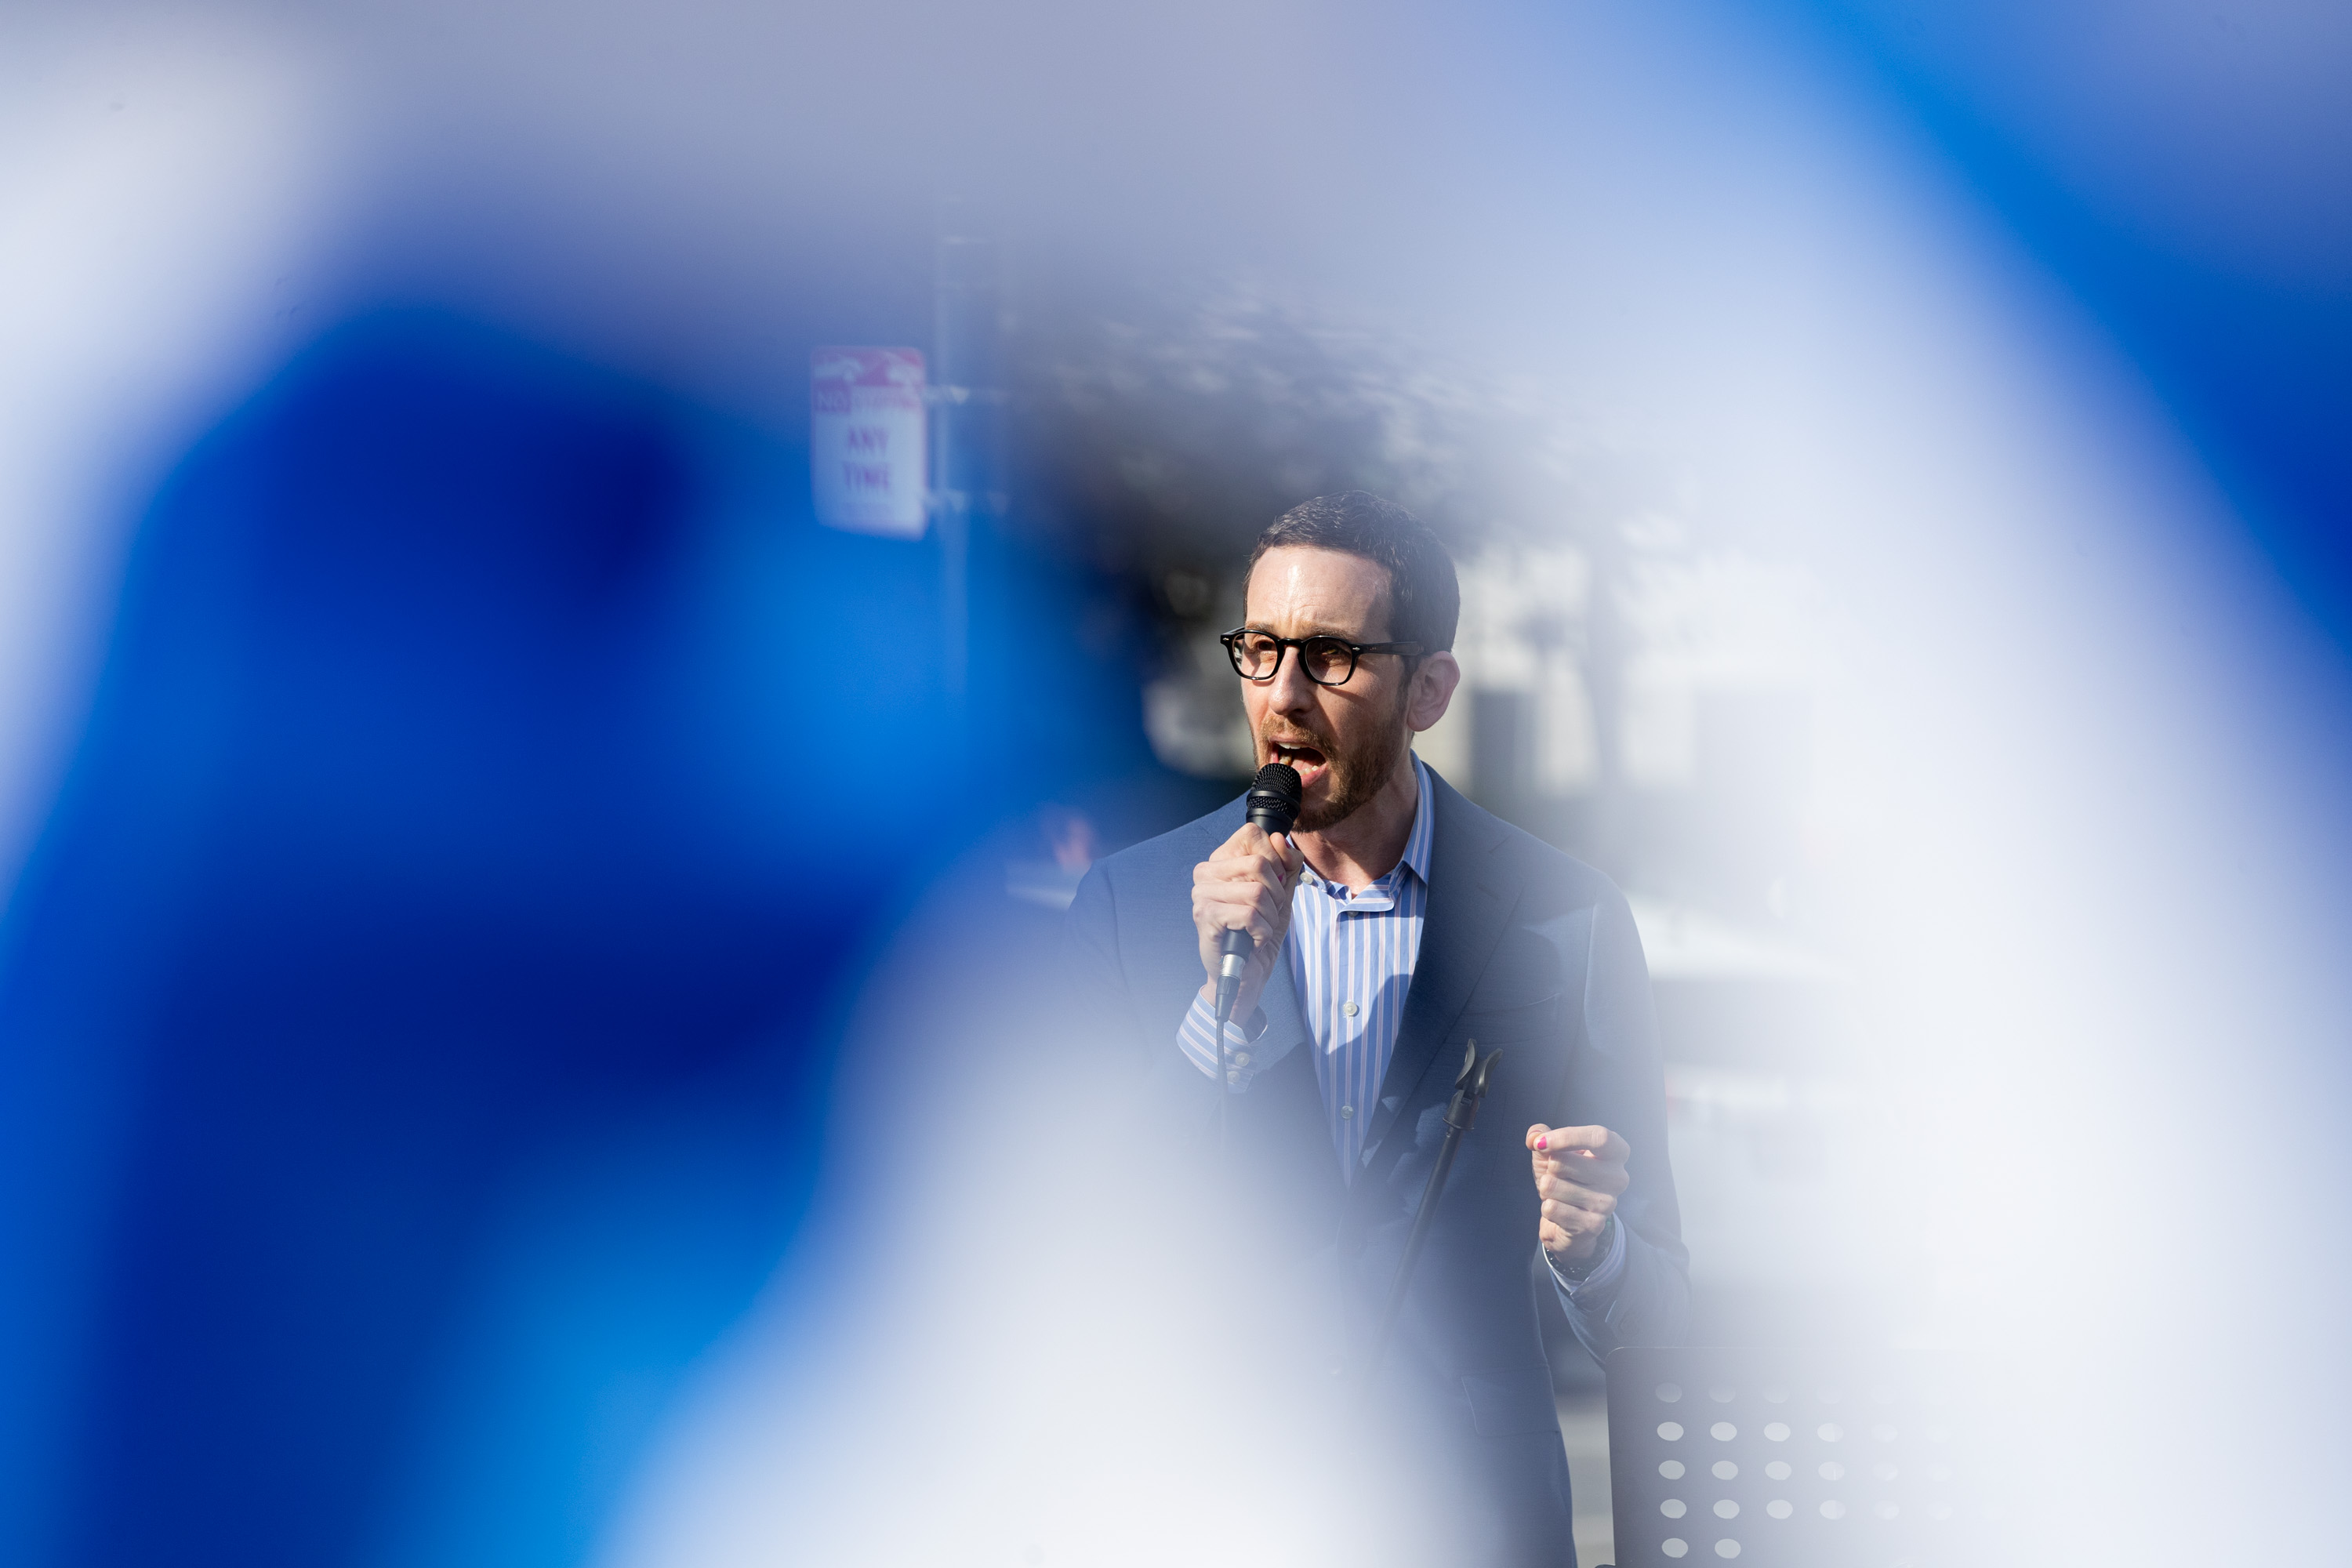 A man in a suit speaks into a microphone, partially obscured by a blue blurry foreground.